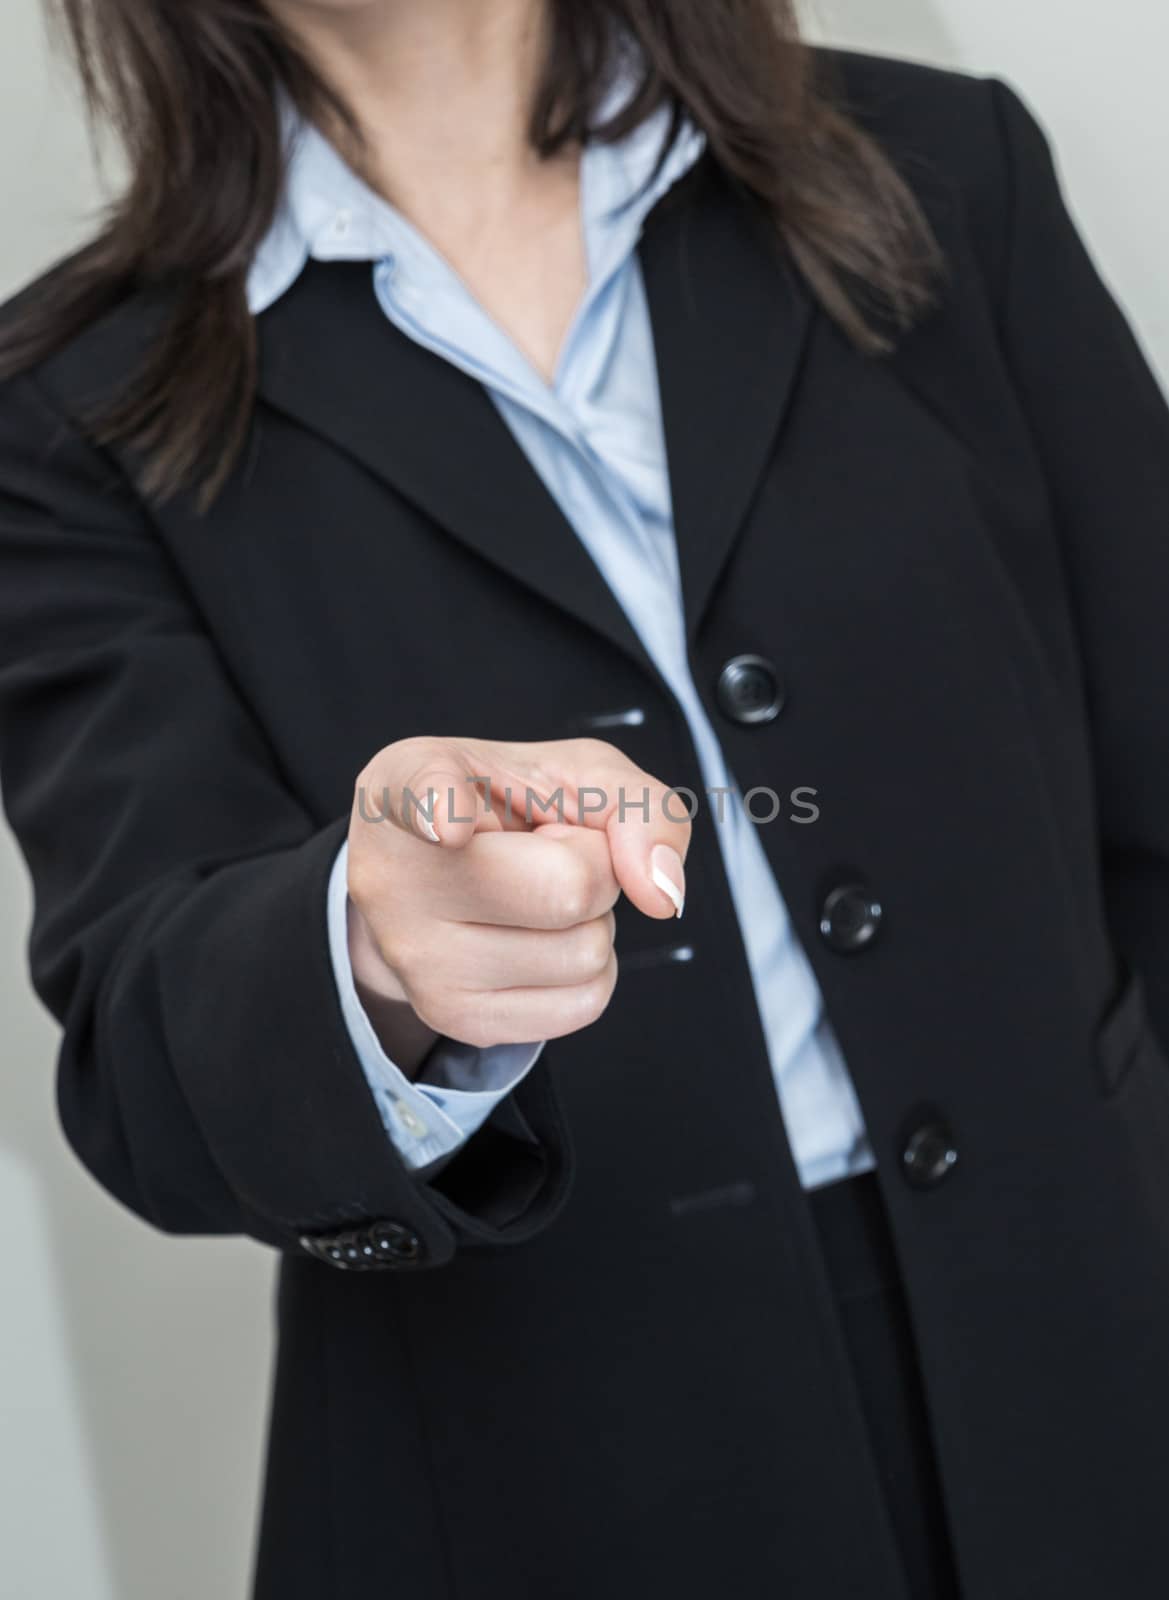 Woman pointing at you with one finger by IVYPHOTOS